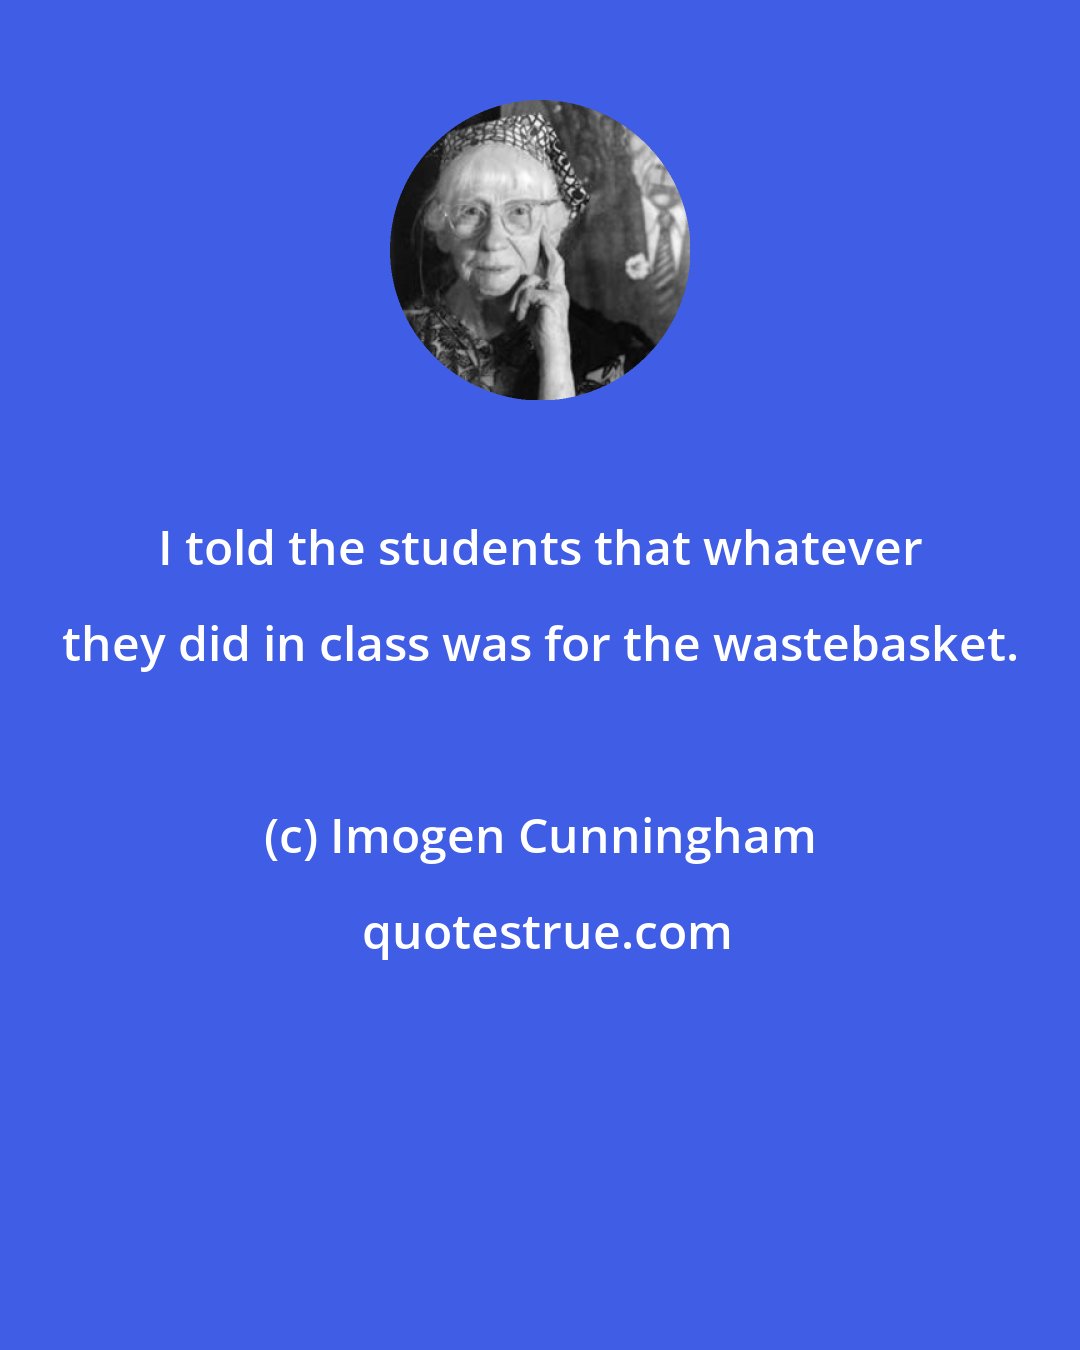 Imogen Cunningham: I told the students that whatever they did in class was for the wastebasket.